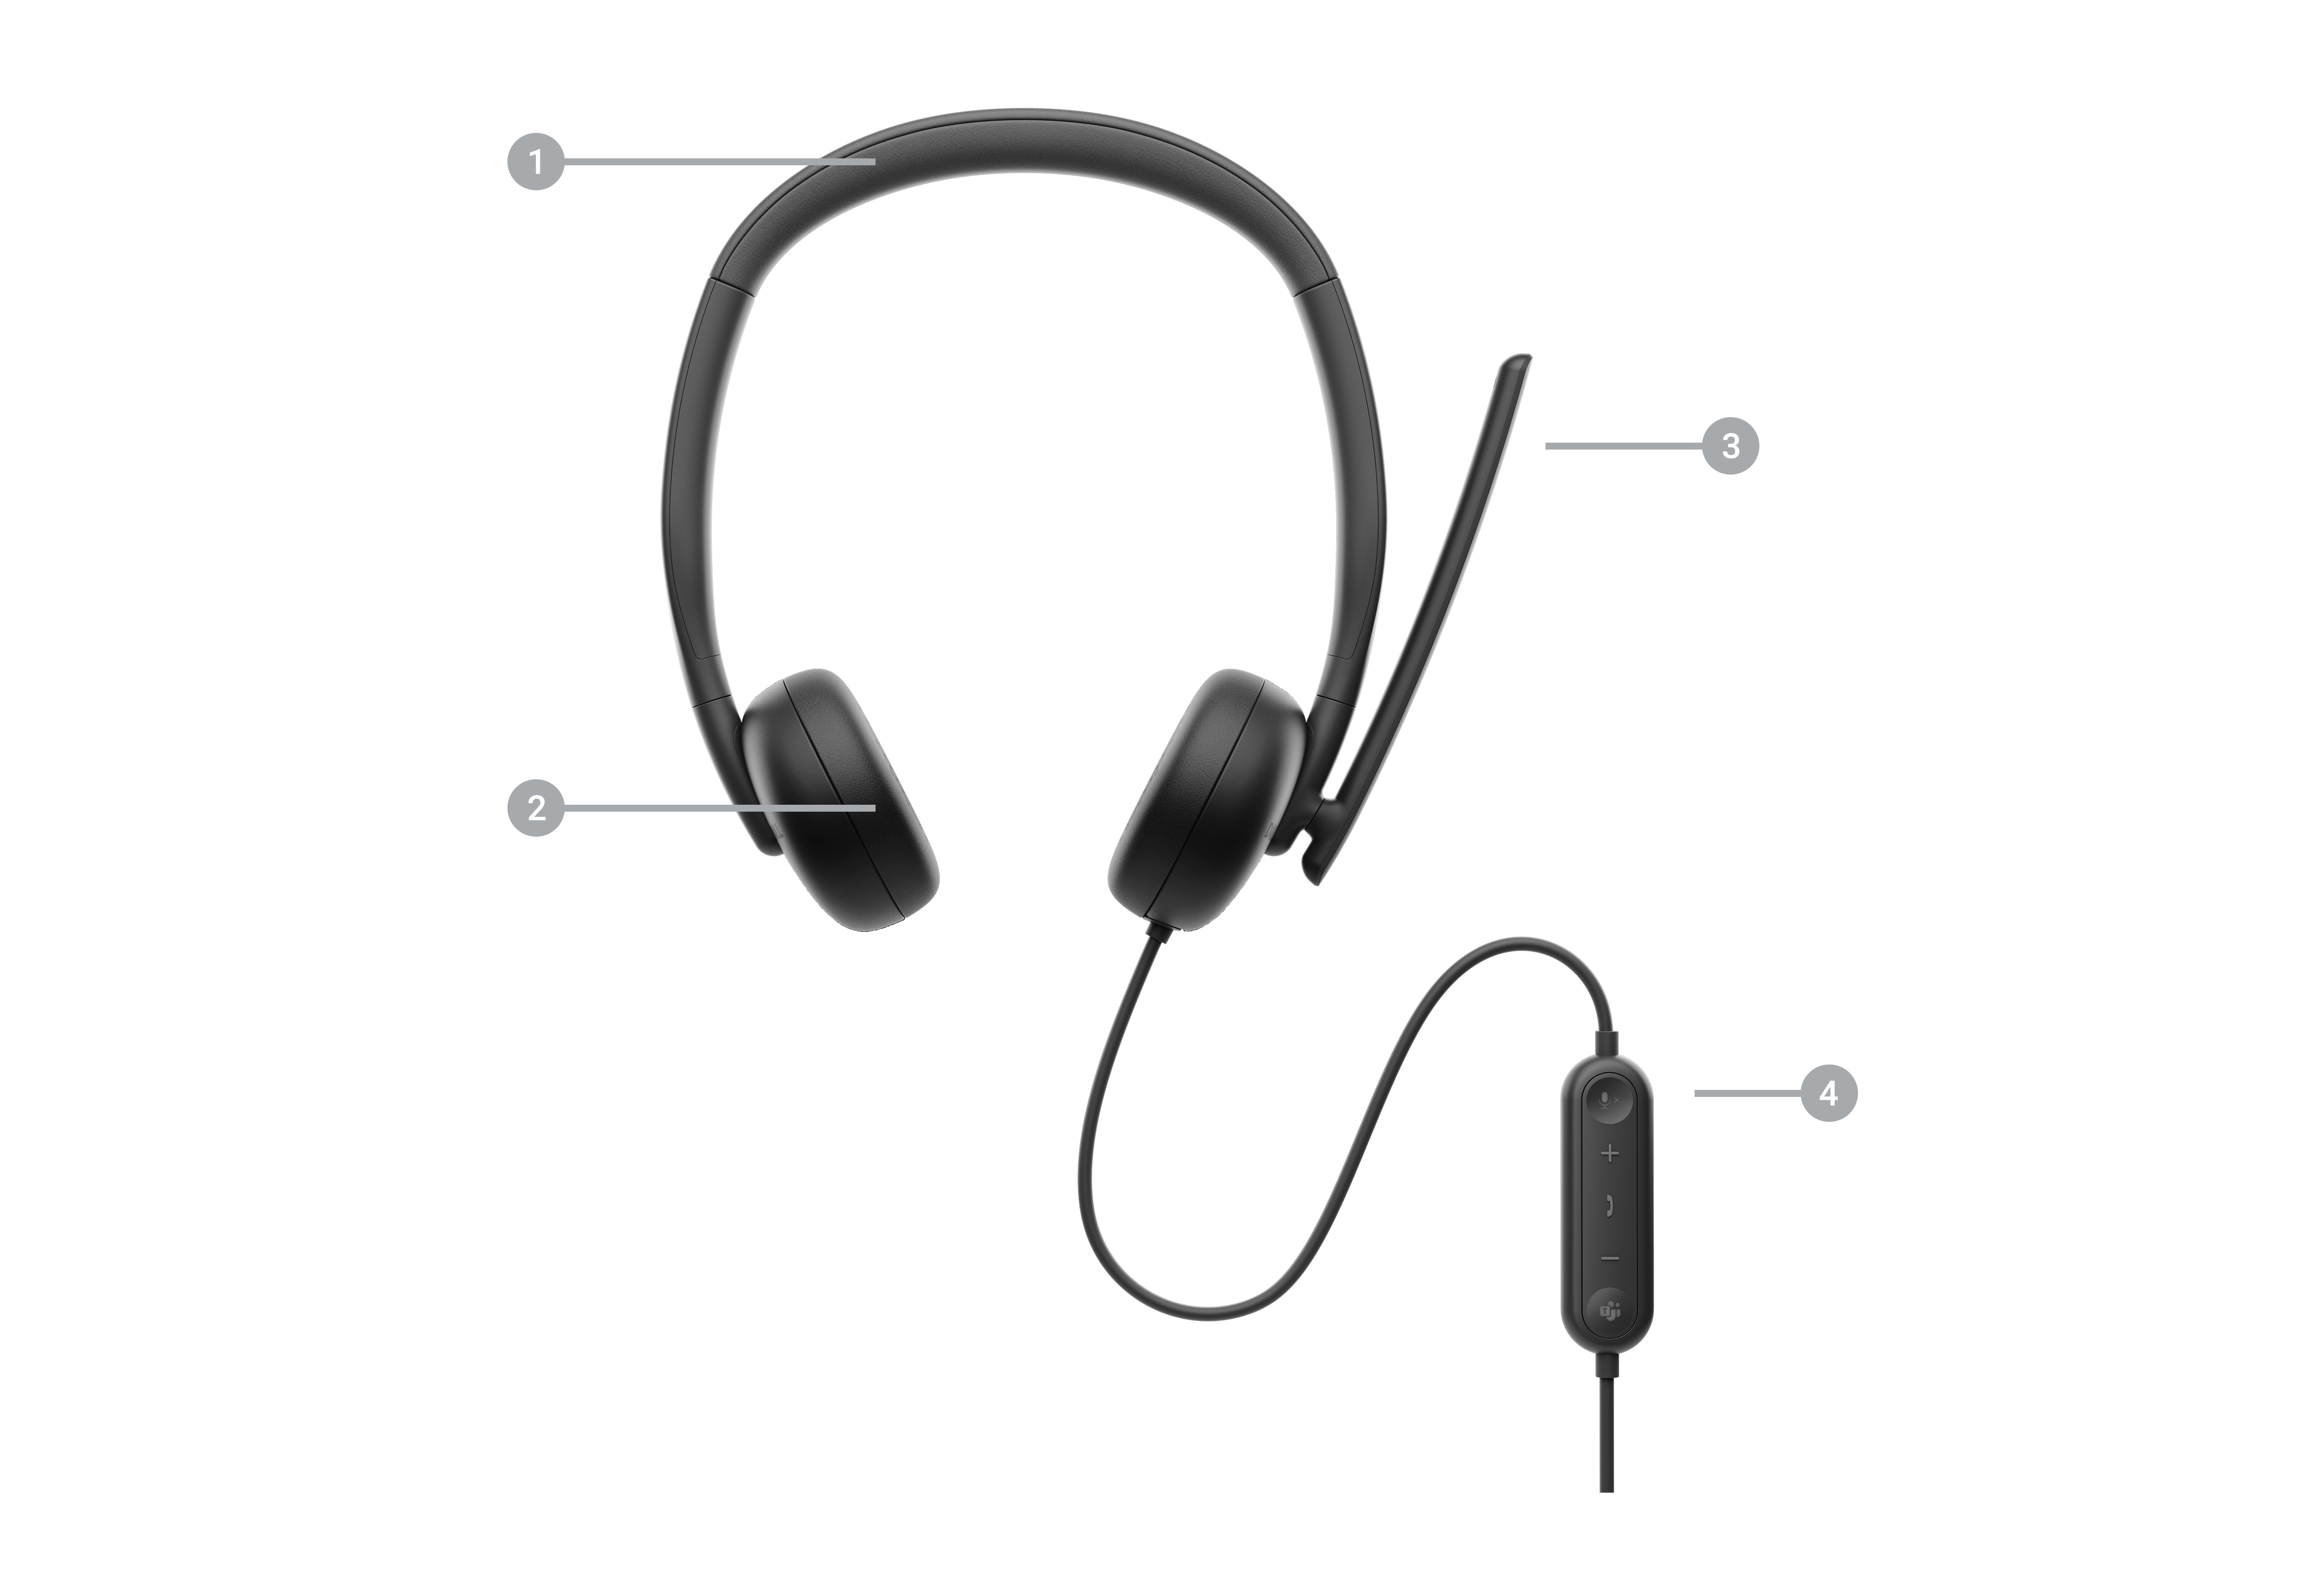 Dell WH3024 Wired Headset with numbers from 1 to 4 showing the product features.